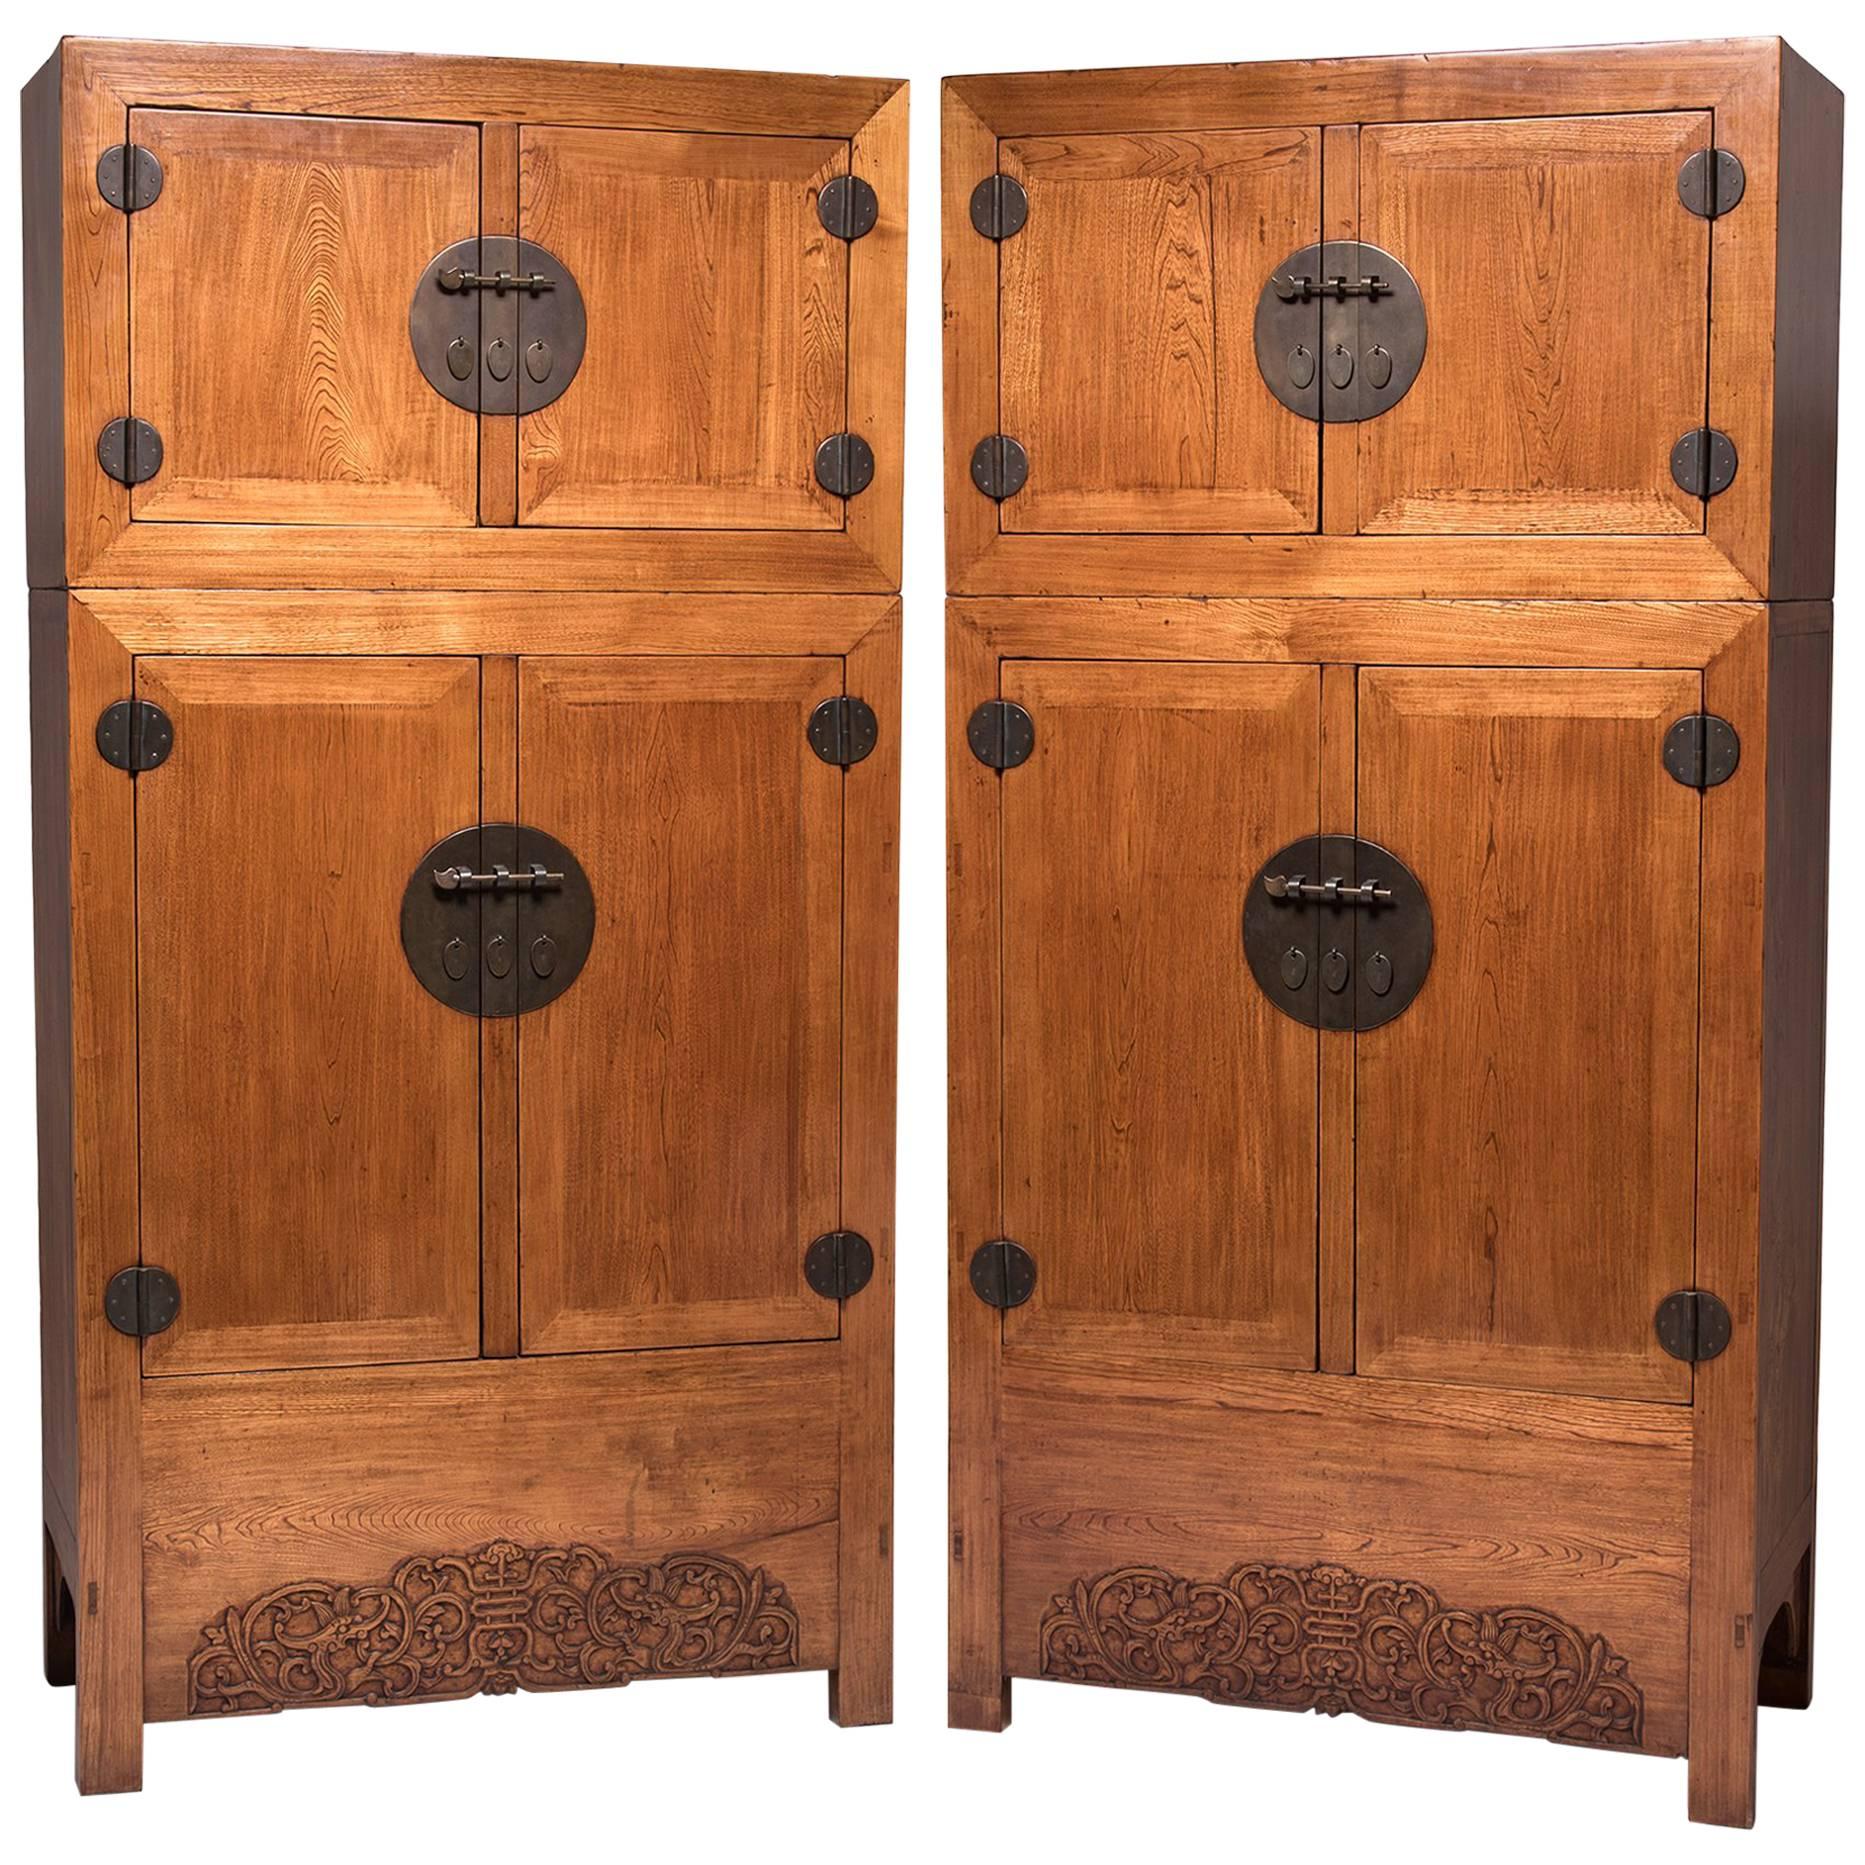 Pair of Chinese Double Dragon Compound Cabinets, c. 1830s